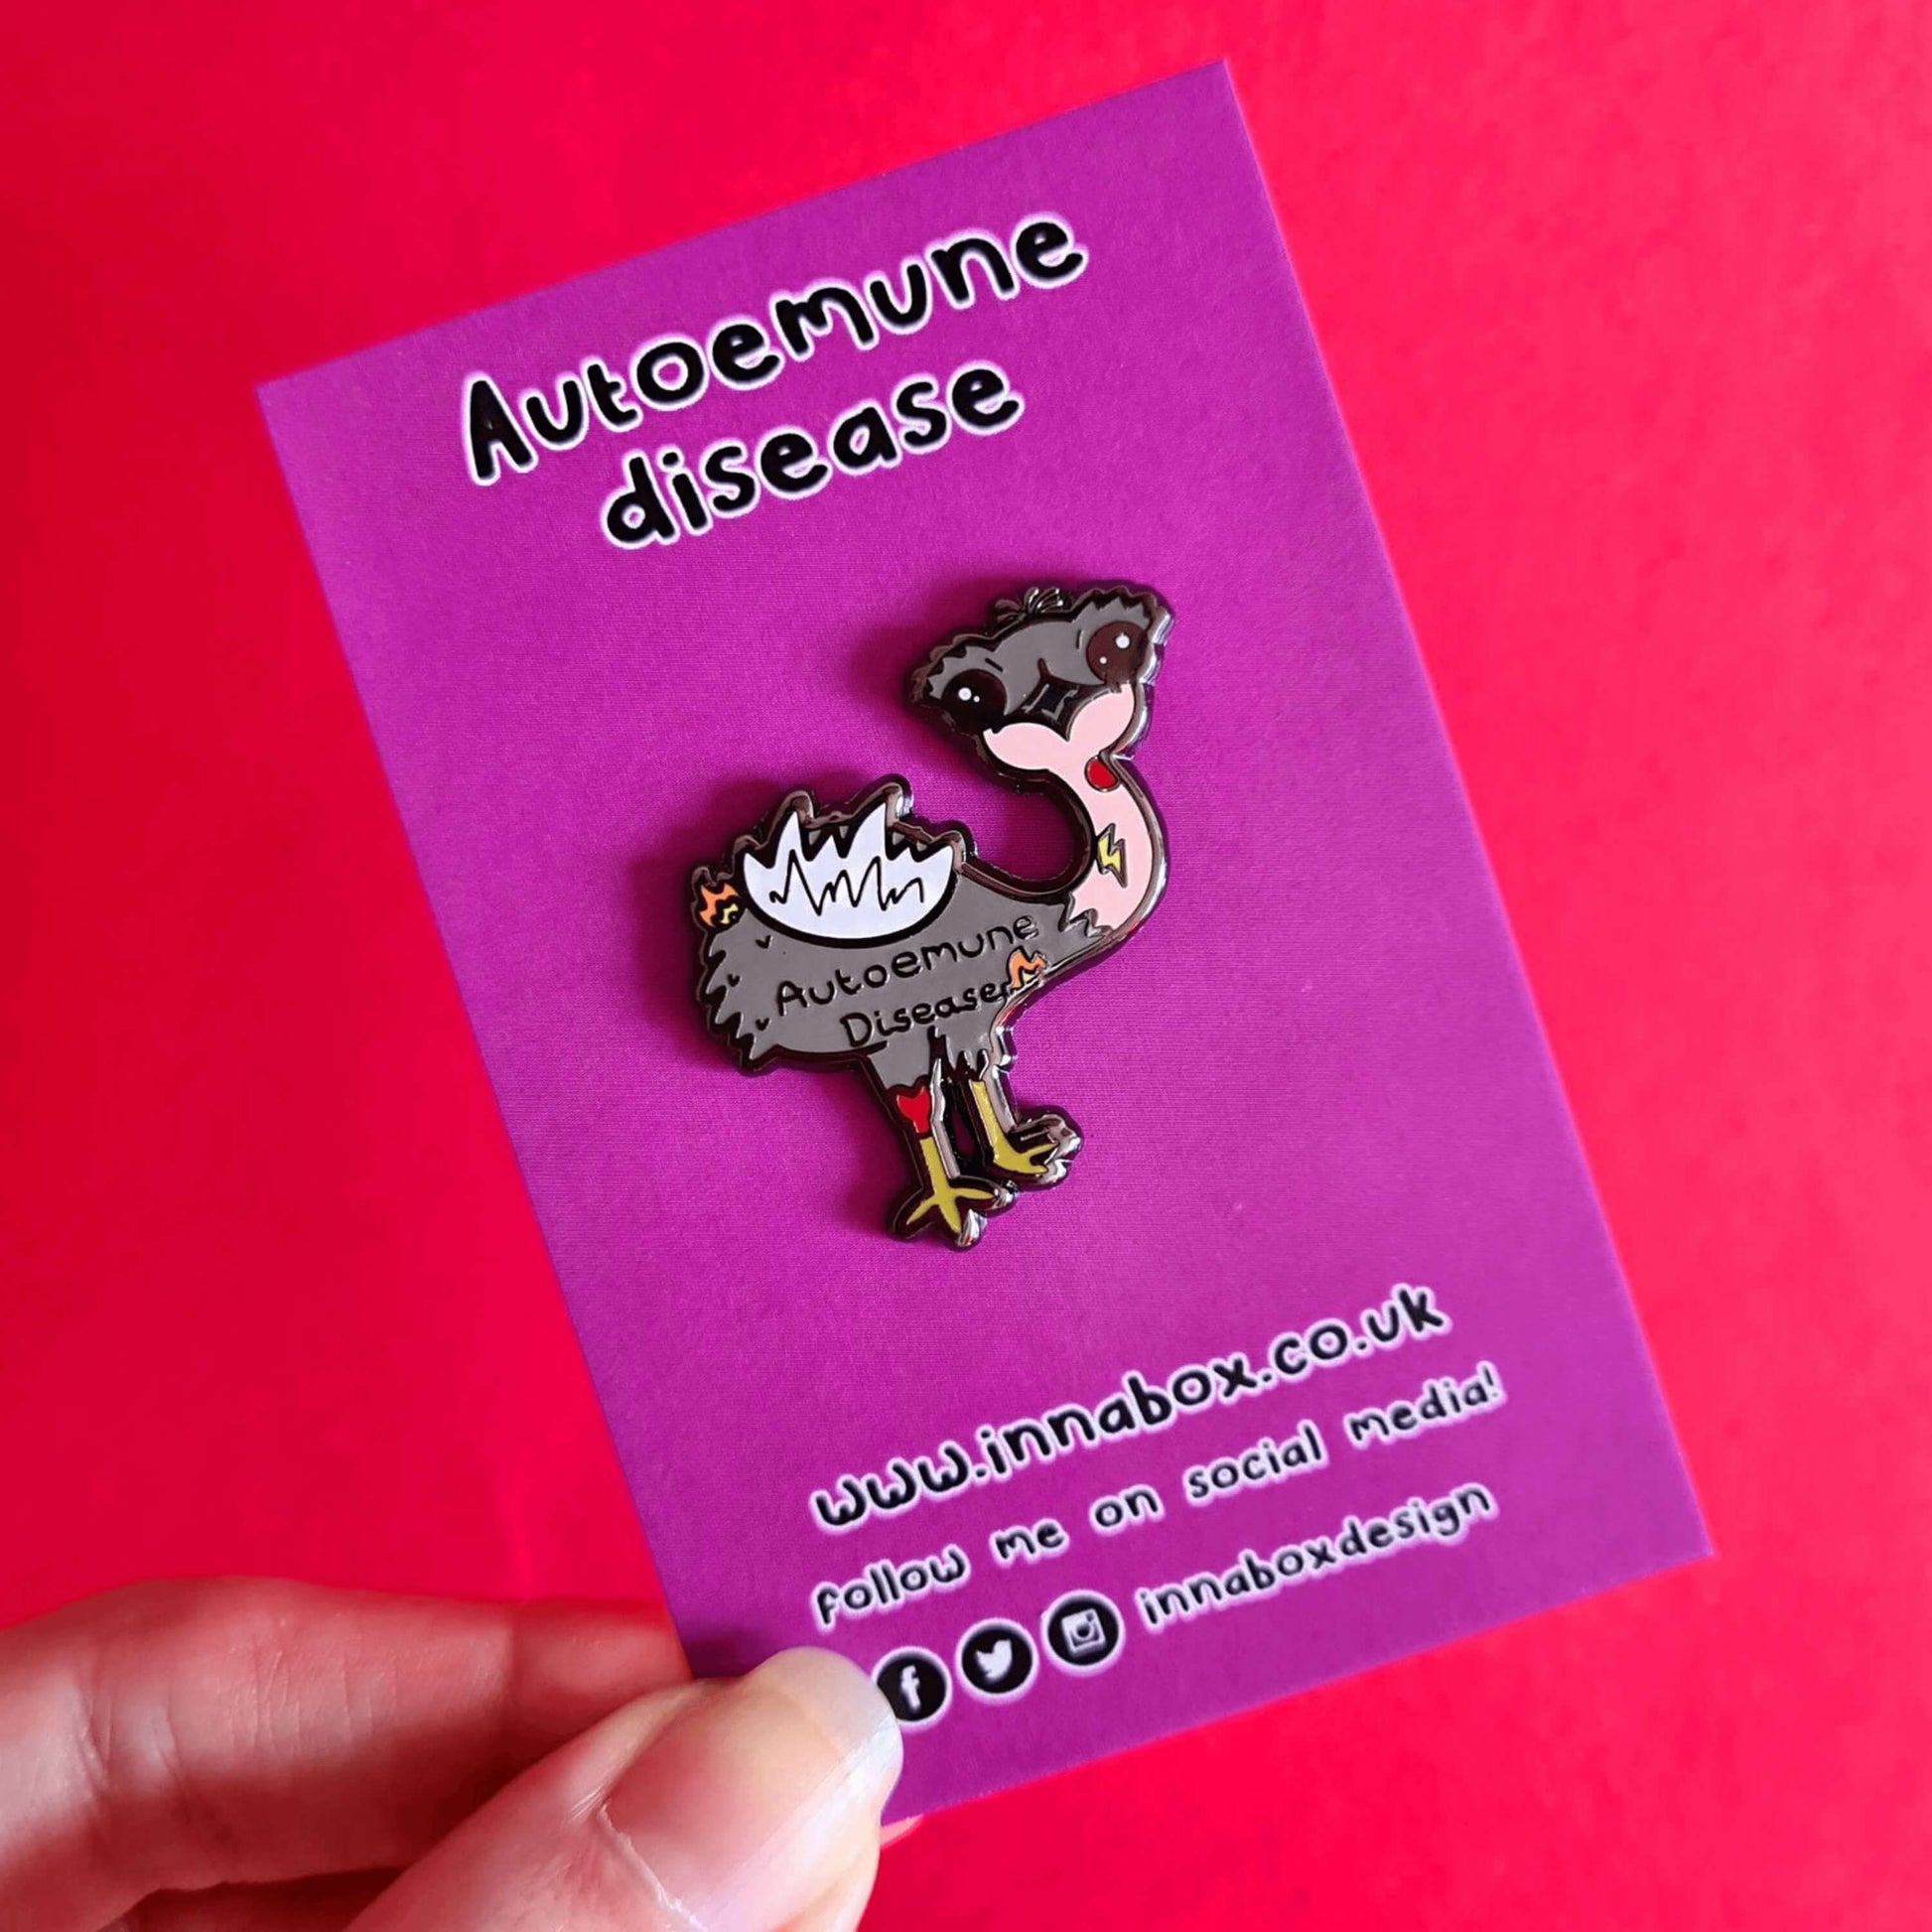 Autoemune Enamel Pin - Autoimmune Disease on a purple backing card being held over a red background. The pin is a grey and white emu bird with various problems highlighted with lightning bolts, flames and red circles with the words autoemune disease written across its belly. Design created to raise awareness for autoimmune diseases.